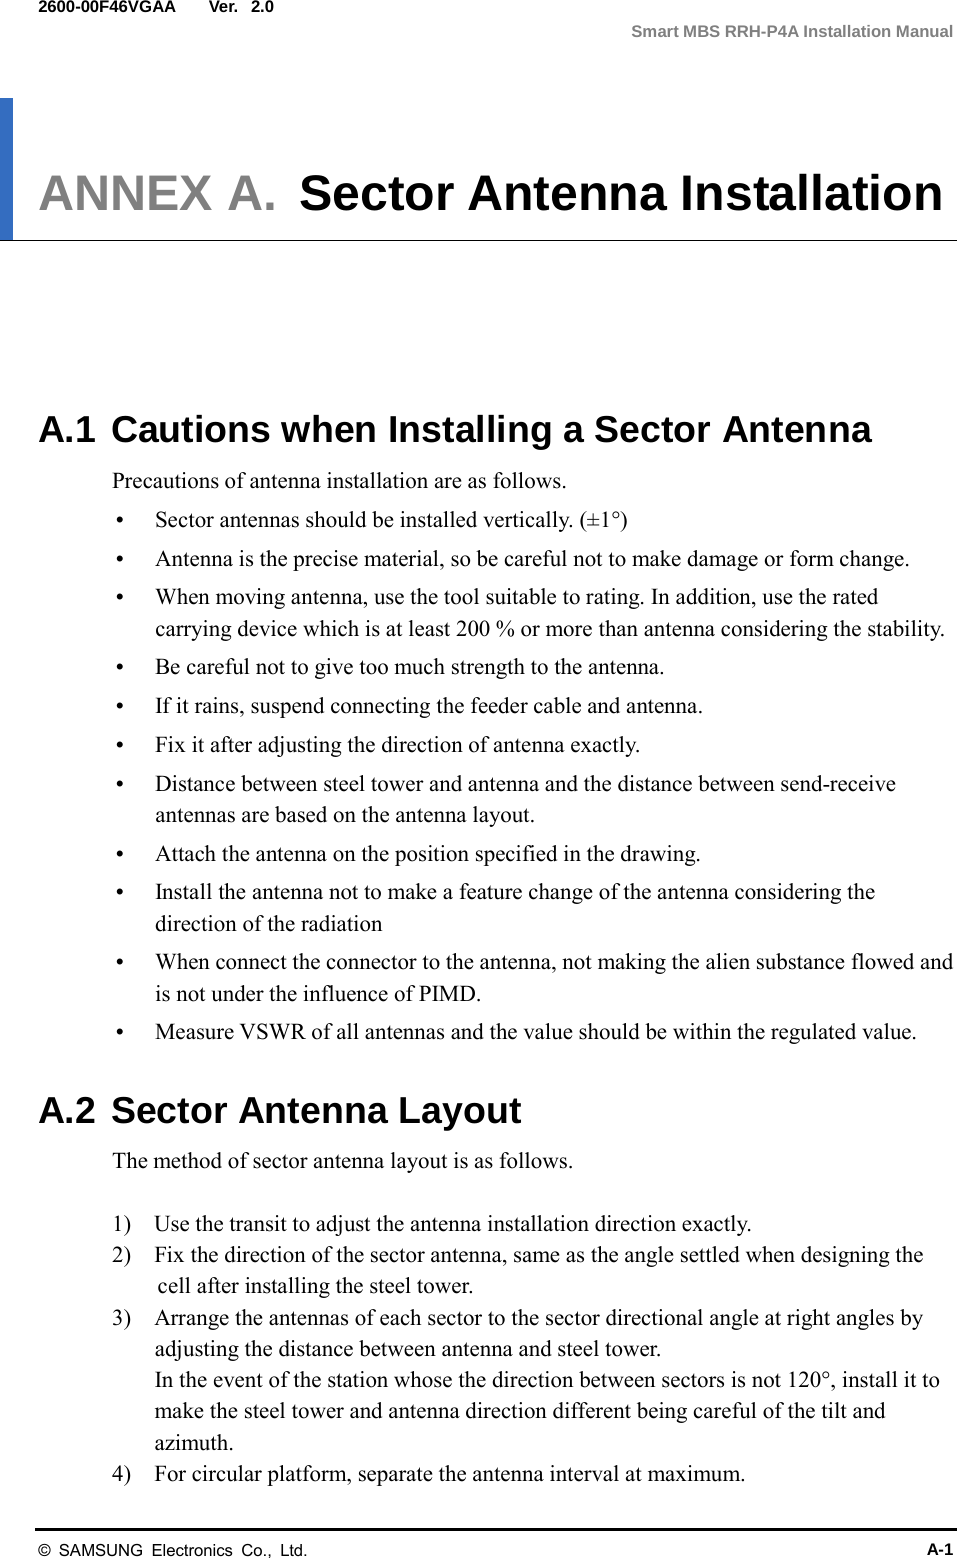  Ver.  Smart MBS RRH-P4A Installation Manual 2600-00F46VGAA 2.0 ANNEX A. Sector Antenna Installation      A.1 Cautions when Installing a Sector Antenna Precautions of antenna installation are as follows.  Sector antennas should be installed vertically. (±1°)  Antenna is the precise material, so be careful not to make damage or form change.    When moving antenna, use the tool suitable to rating. In addition, use the rated carrying device which is at least 200 % or more than antenna considering the stability.  Be careful not to give too much strength to the antenna.    If it rains, suspend connecting the feeder cable and antenna.    Fix it after adjusting the direction of antenna exactly.    Distance between steel tower and antenna and the distance between send-receive antennas are based on the antenna layout.  Attach the antenna on the position specified in the drawing.    Install the antenna not to make a feature change of the antenna considering the direction of the radiation    When connect the connector to the antenna, not making the alien substance flowed and is not under the influence of PIMD.    Measure VSWR of all antennas and the value should be within the regulated value.  A.2 Sector Antenna Layout The method of sector antenna layout is as follows.  1)    Use the transit to adjust the antenna installation direction exactly. 2)    Fix the direction of the sector antenna, same as the angle settled when designing the cell after installing the steel tower. 3)    Arrange the antennas of each sector to the sector directional angle at right angles by adjusting the distance between antenna and steel tower. In the event of the station whose the direction between sectors is not 120°, install it to make the steel tower and antenna direction different being careful of the tilt and azimuth. 4)    For circular platform, separate the antenna interval at maximum. © SAMSUNG Electronics Co., Ltd. A-1 